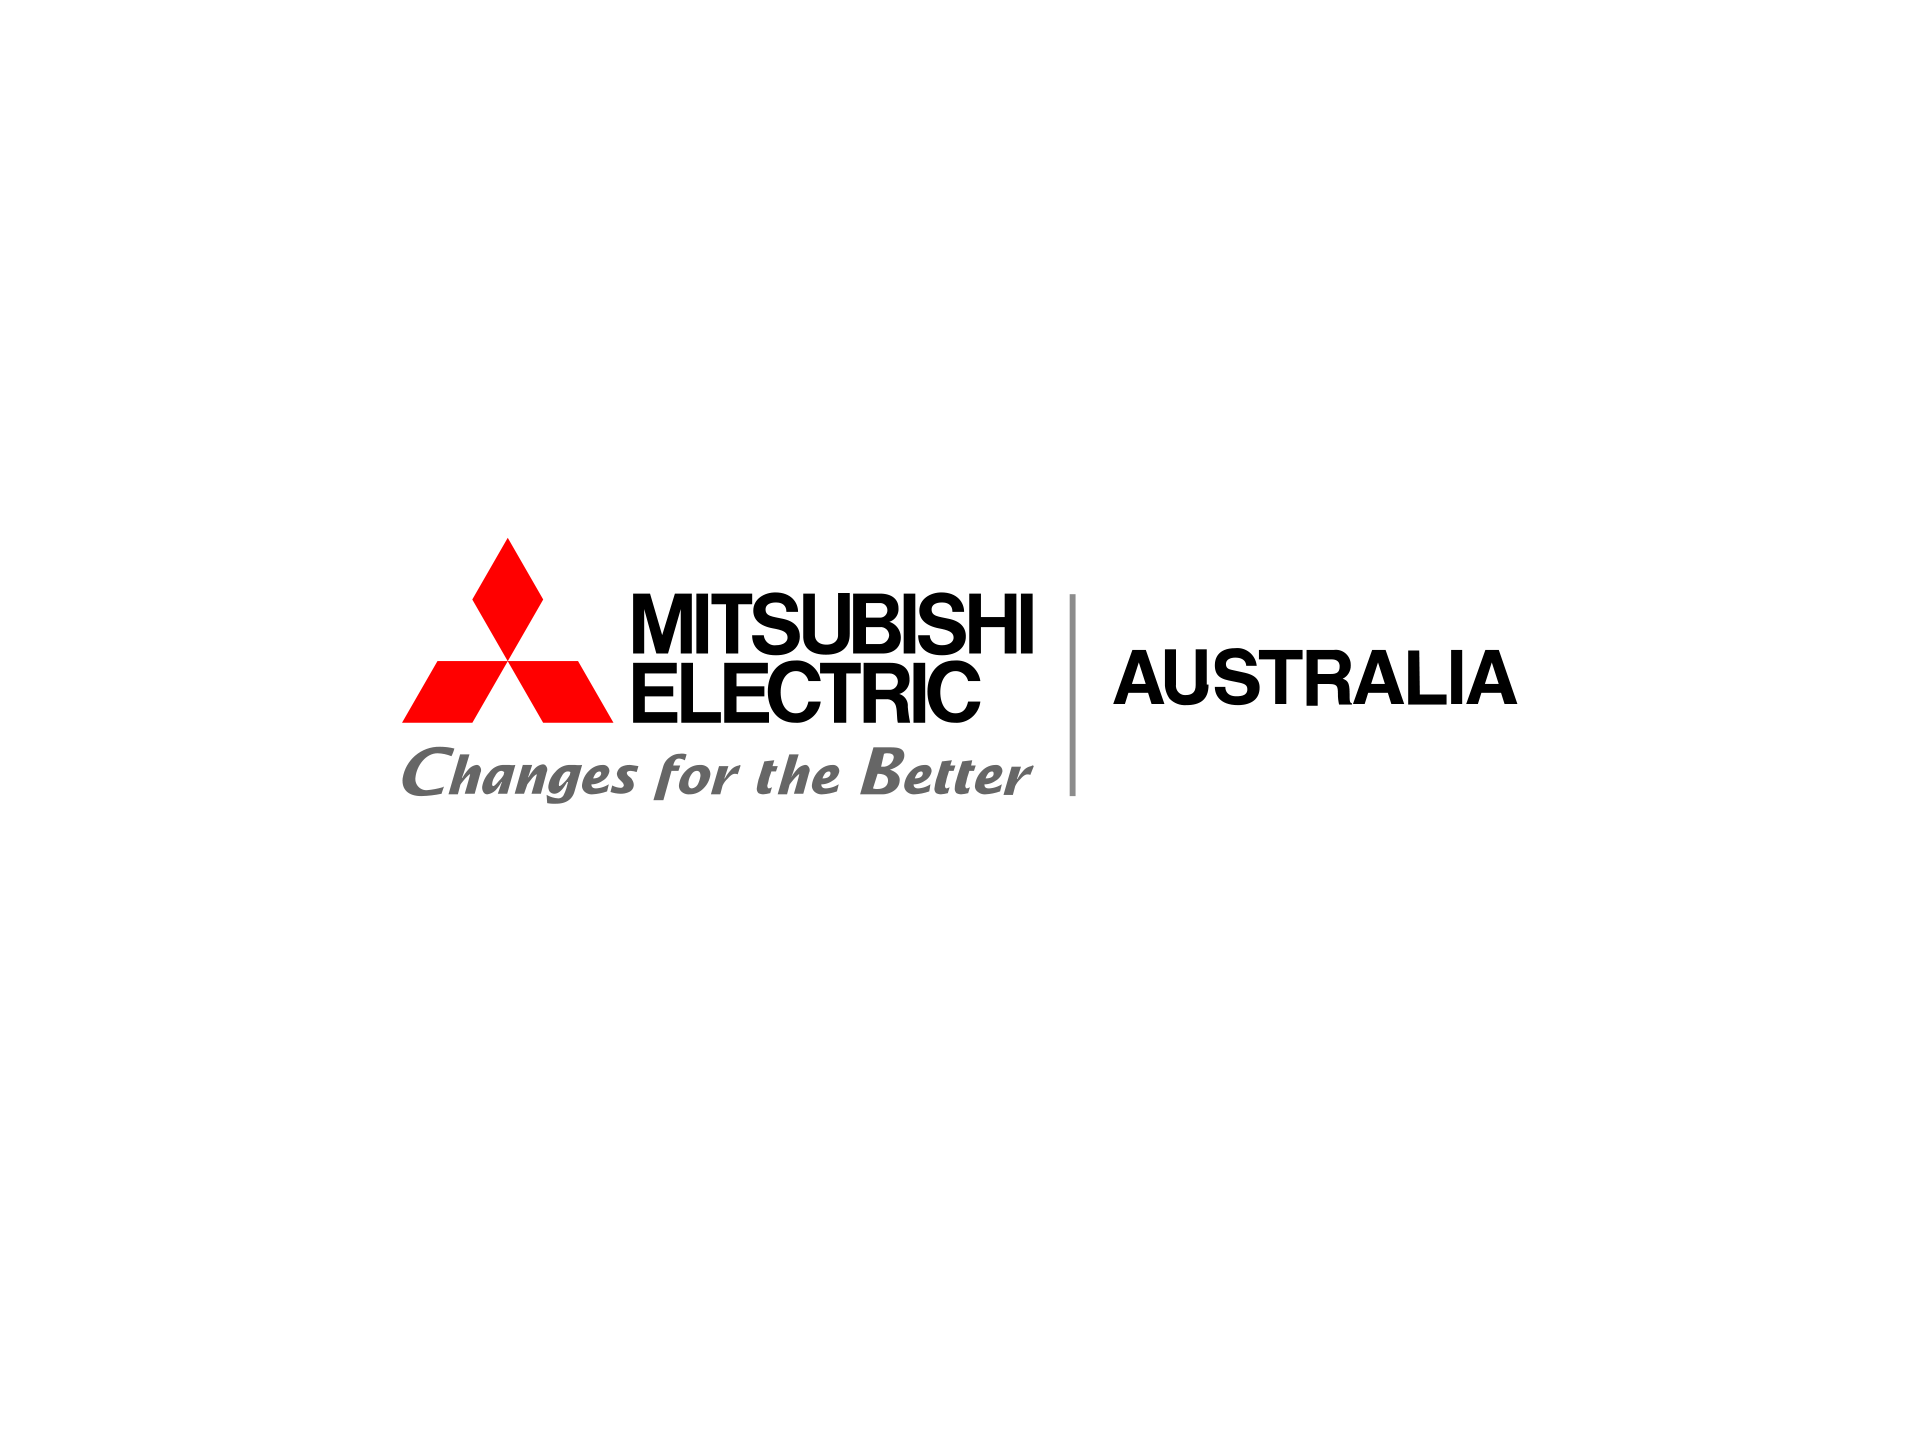 Mitsubishi Electric Australia and Australian Department of Defence Agree Joint Development of Laser Technology to Enhance Surveillance and Survivability of Defense Platforms